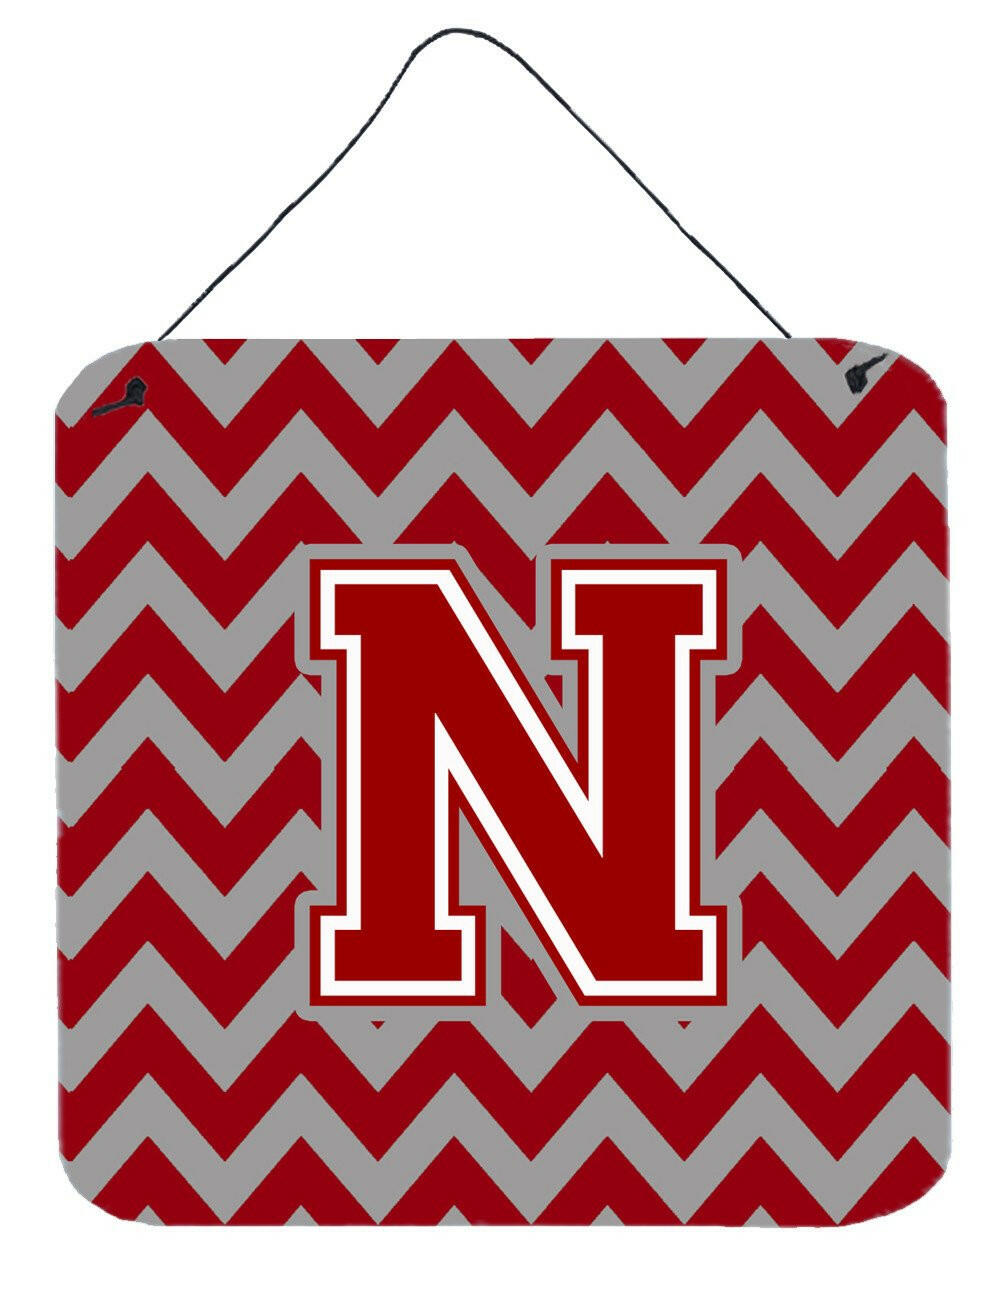 Letter N Chevron Maroon and White Wall or Door Hanging Prints CJ1049-NDS66 by Caroline's Treasures